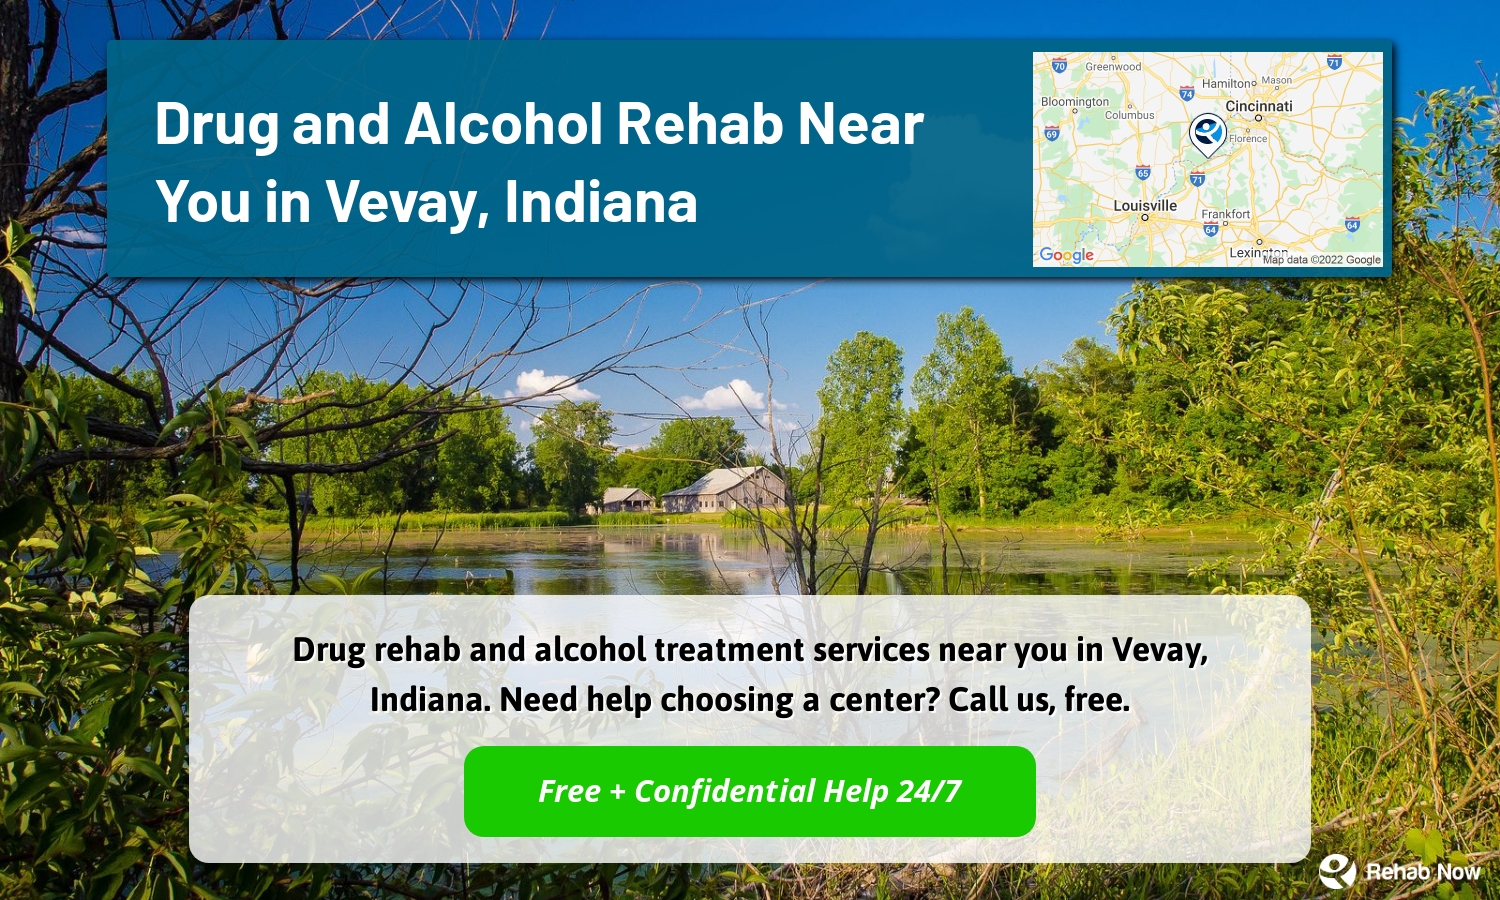 Drug rehab and alcohol treatment services near you in Vevay, Indiana. Need help choosing a center? Call us, free.